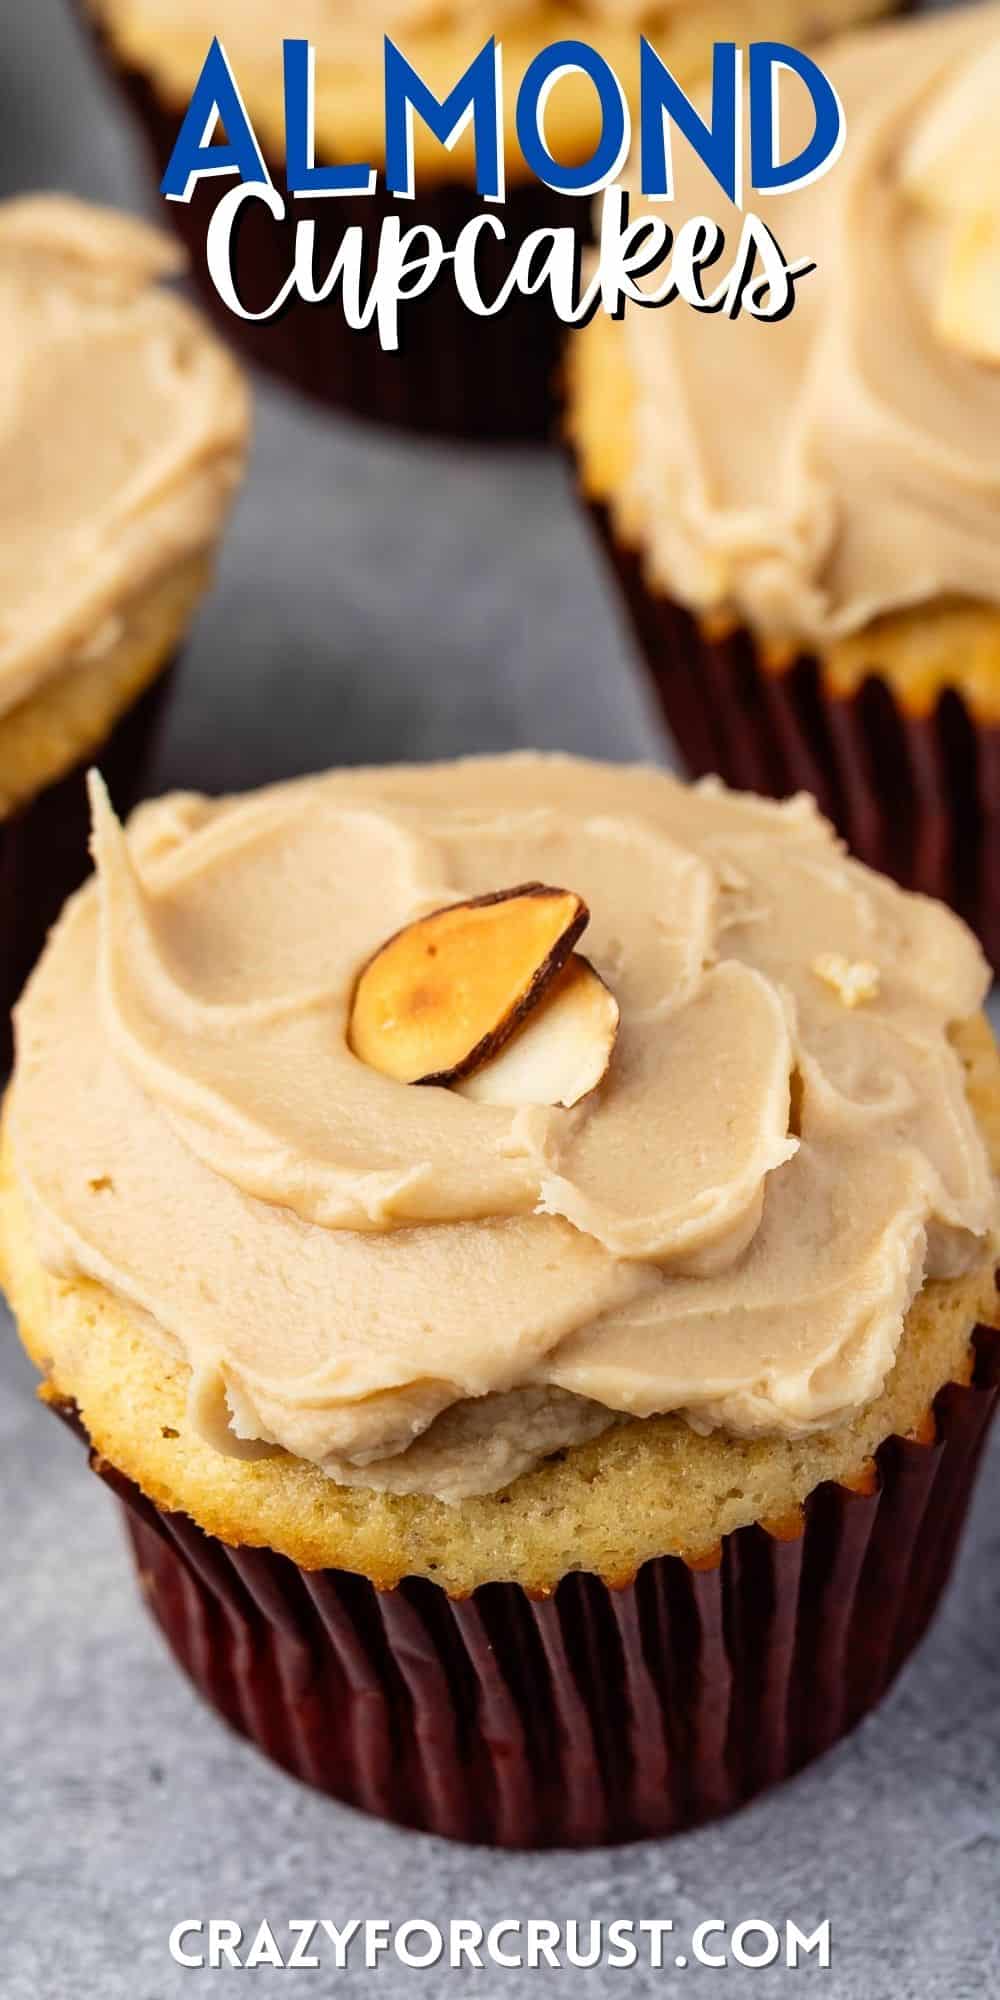 almond cupcake with brown frosting with an almond slice on top with words on the image.